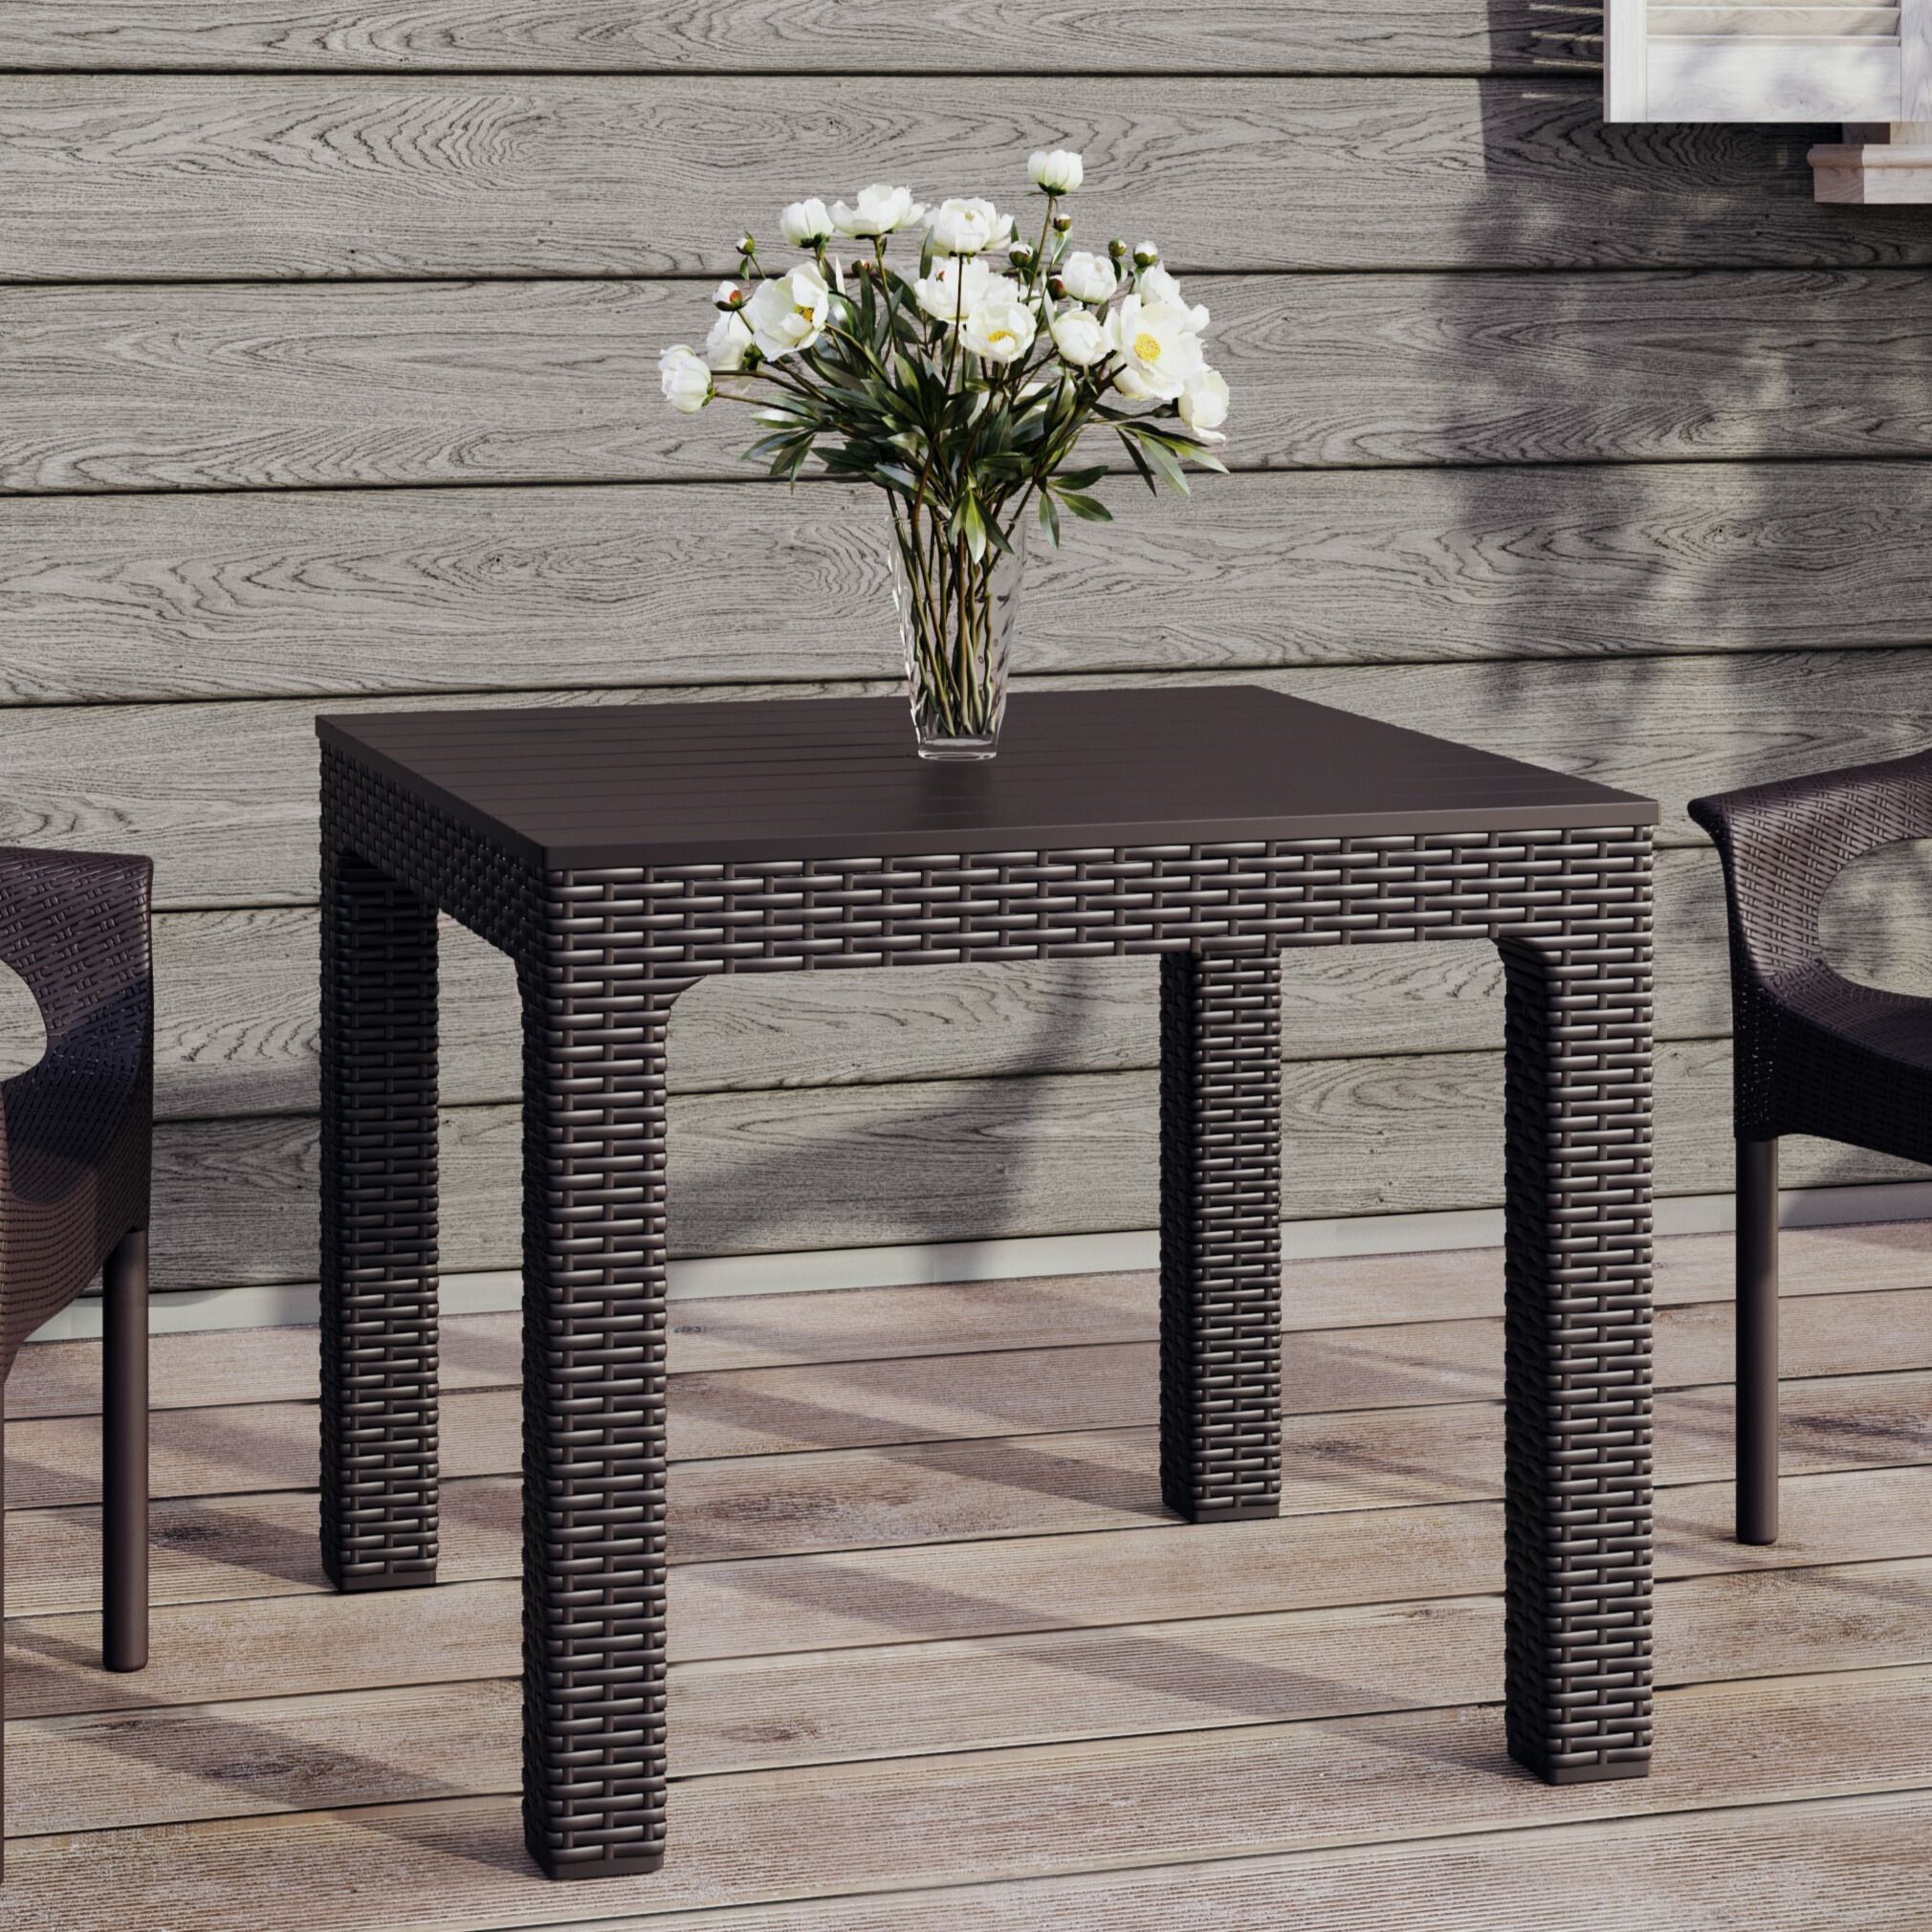 Outdoor brown patio dining table